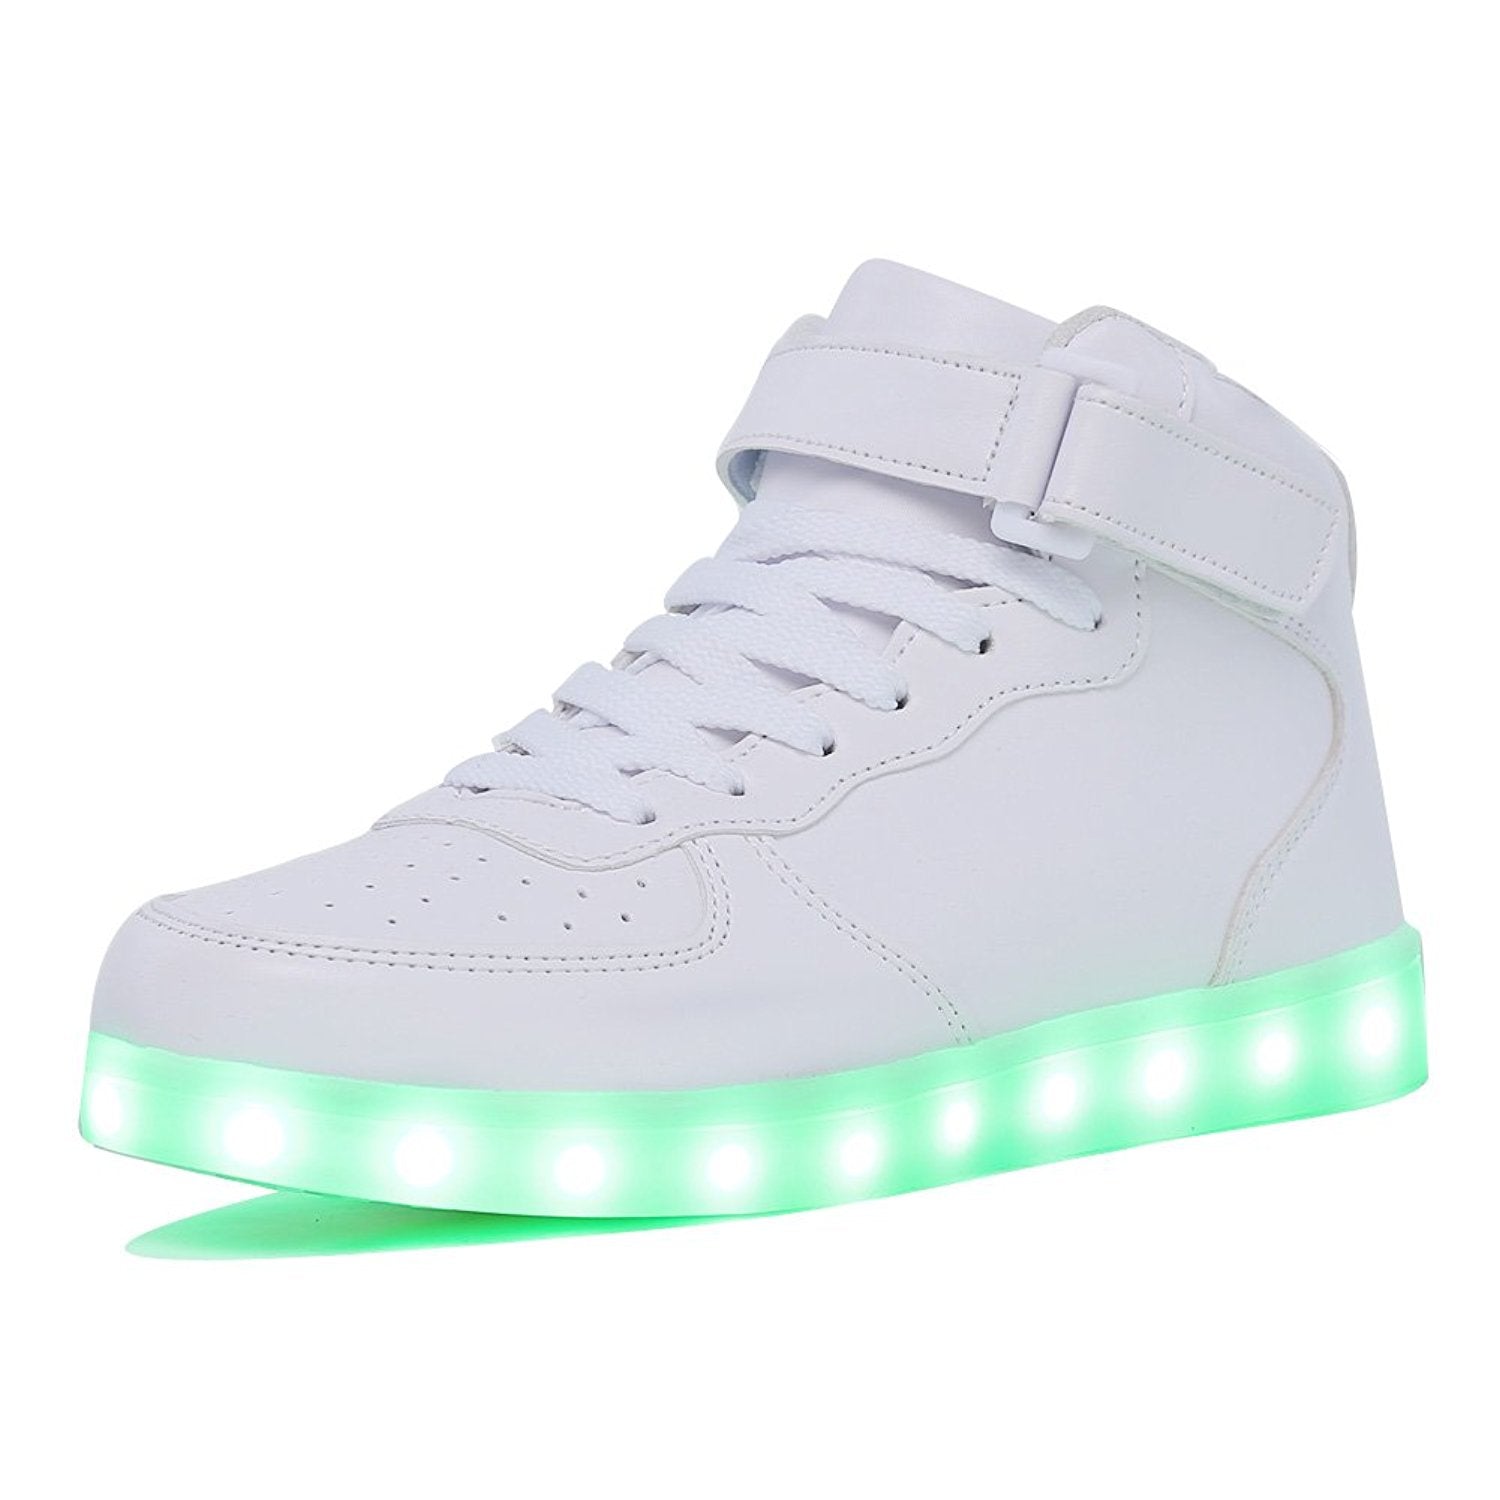 KRIATIV Kids Boy and Girl's High Top LED Sneakers Light Up Flashing Shoes Luminous Sneakers